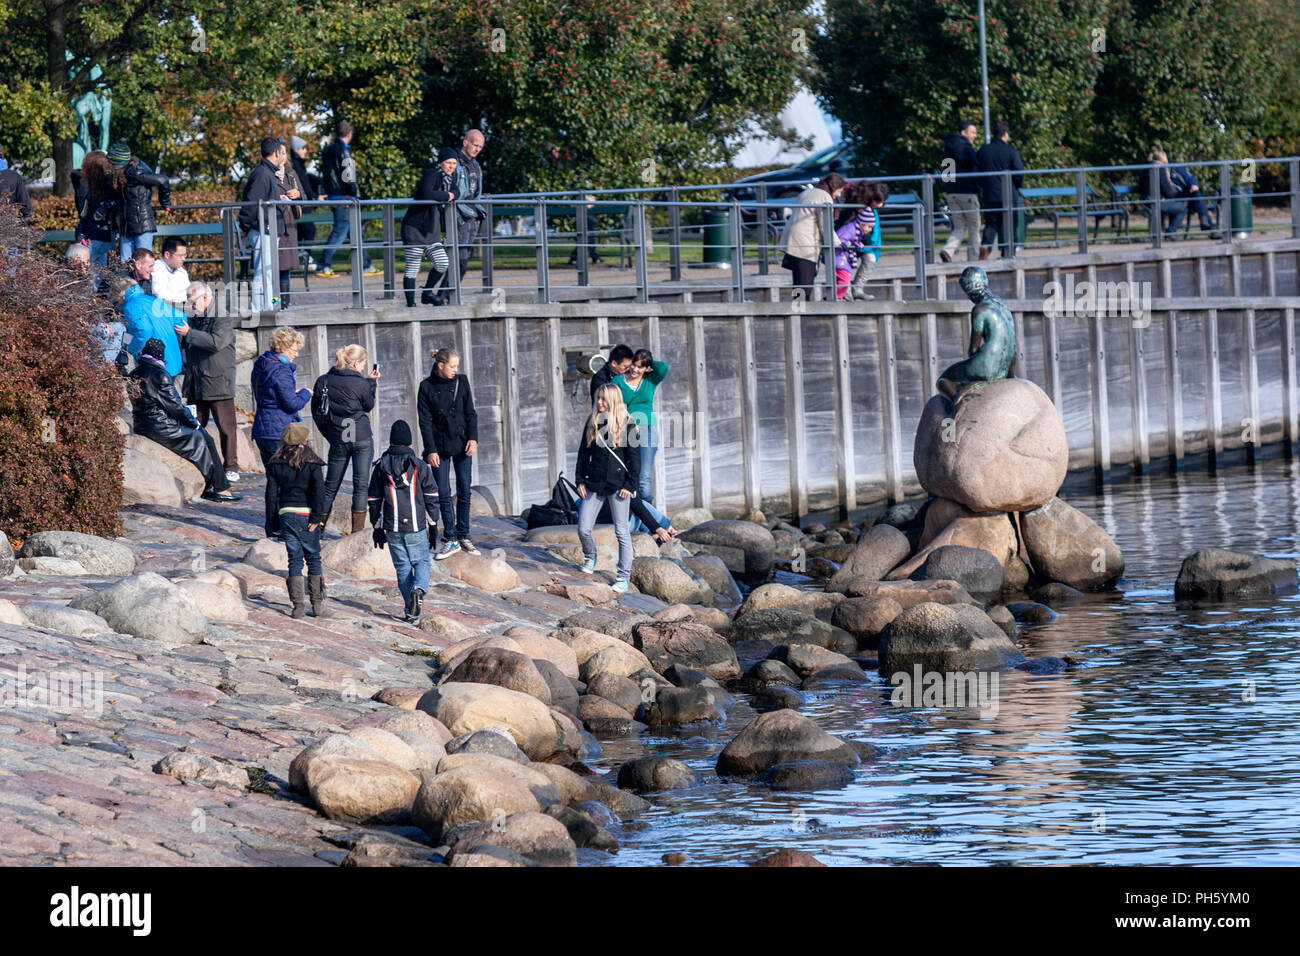 Tourists taking pictures at the The Little Mermaid  bronze statue by Edvard Erikseni the waterside at the Langelinie promenade in Copenhagen, Denmark Stock Photo